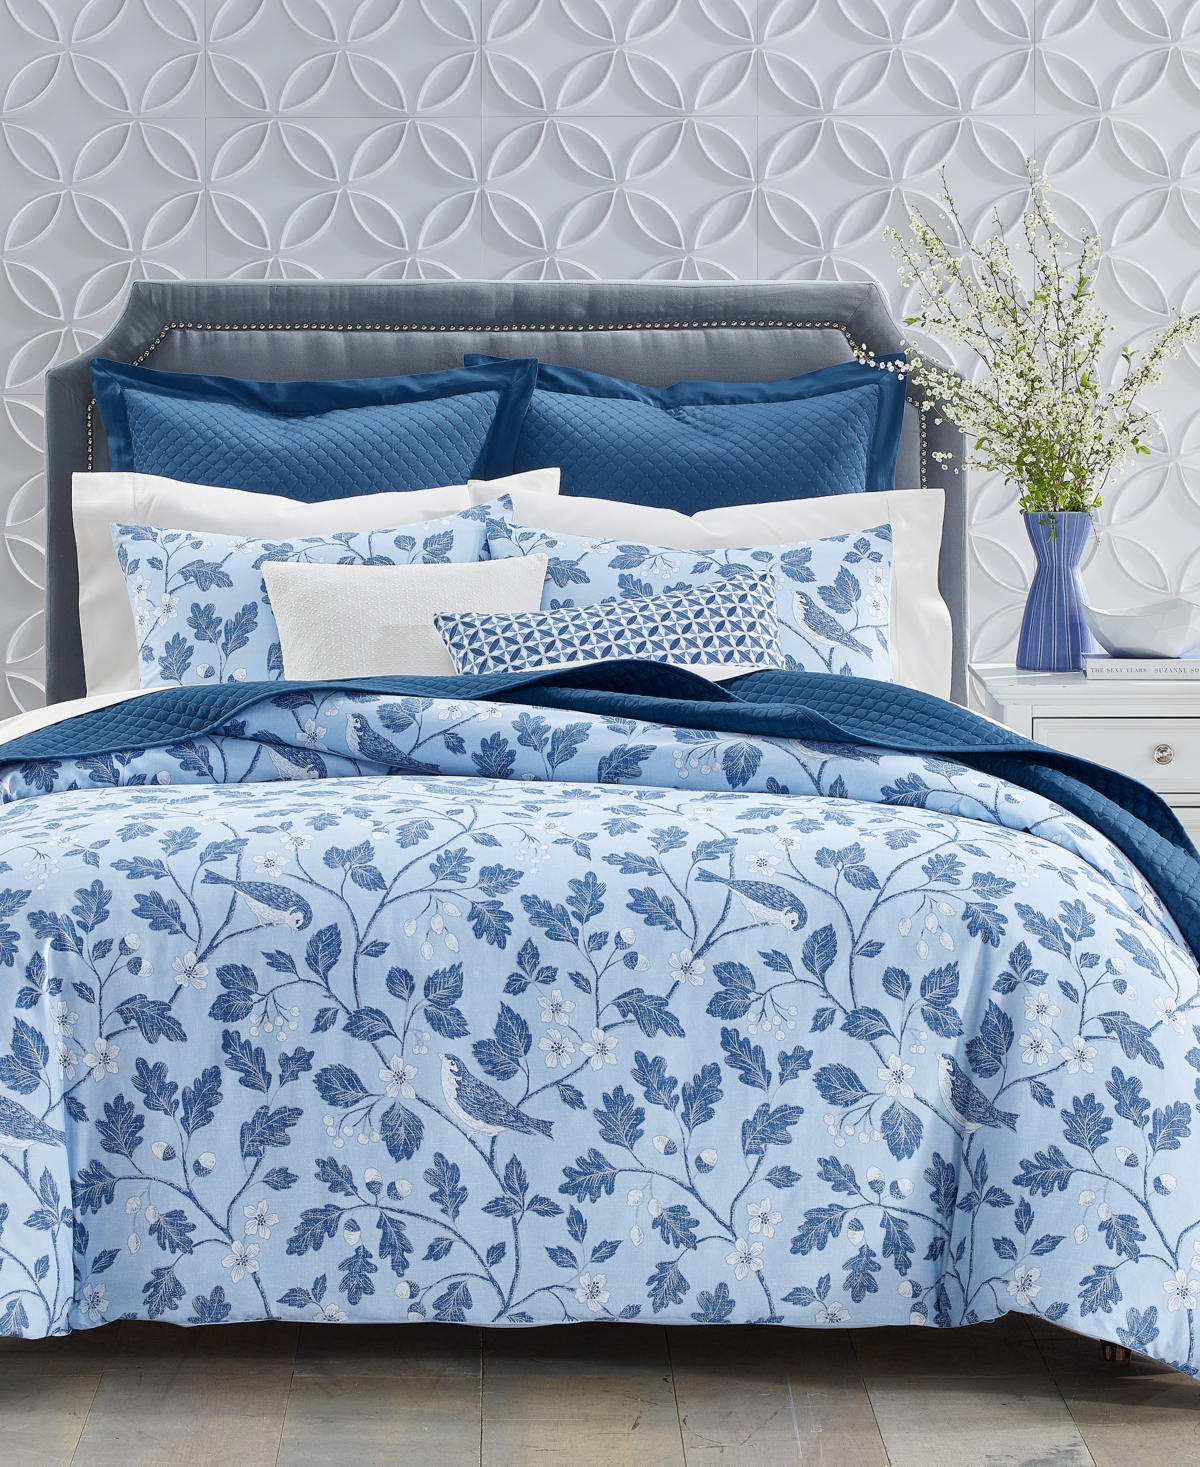 Charter Club Aviary 3-pc. Duvet Cover Set, Full/queen, Created For Macy's In Blue